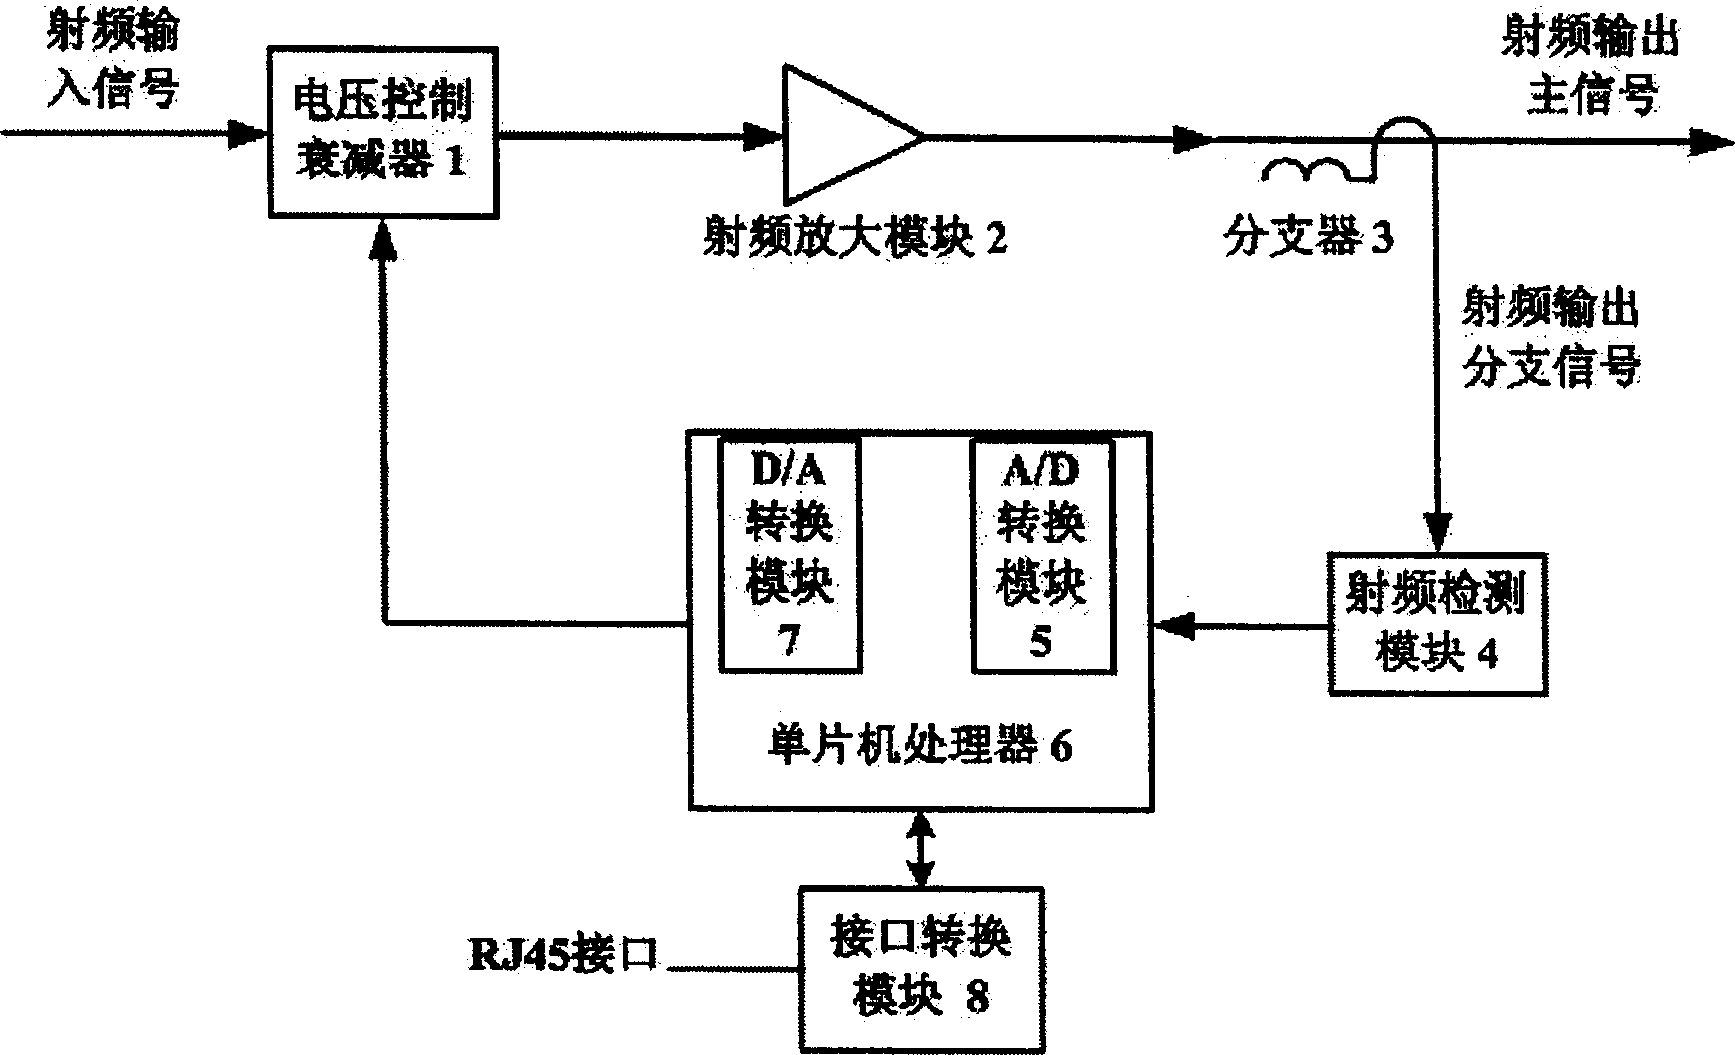 Controllable automatic gain controlling circuit for cable television network